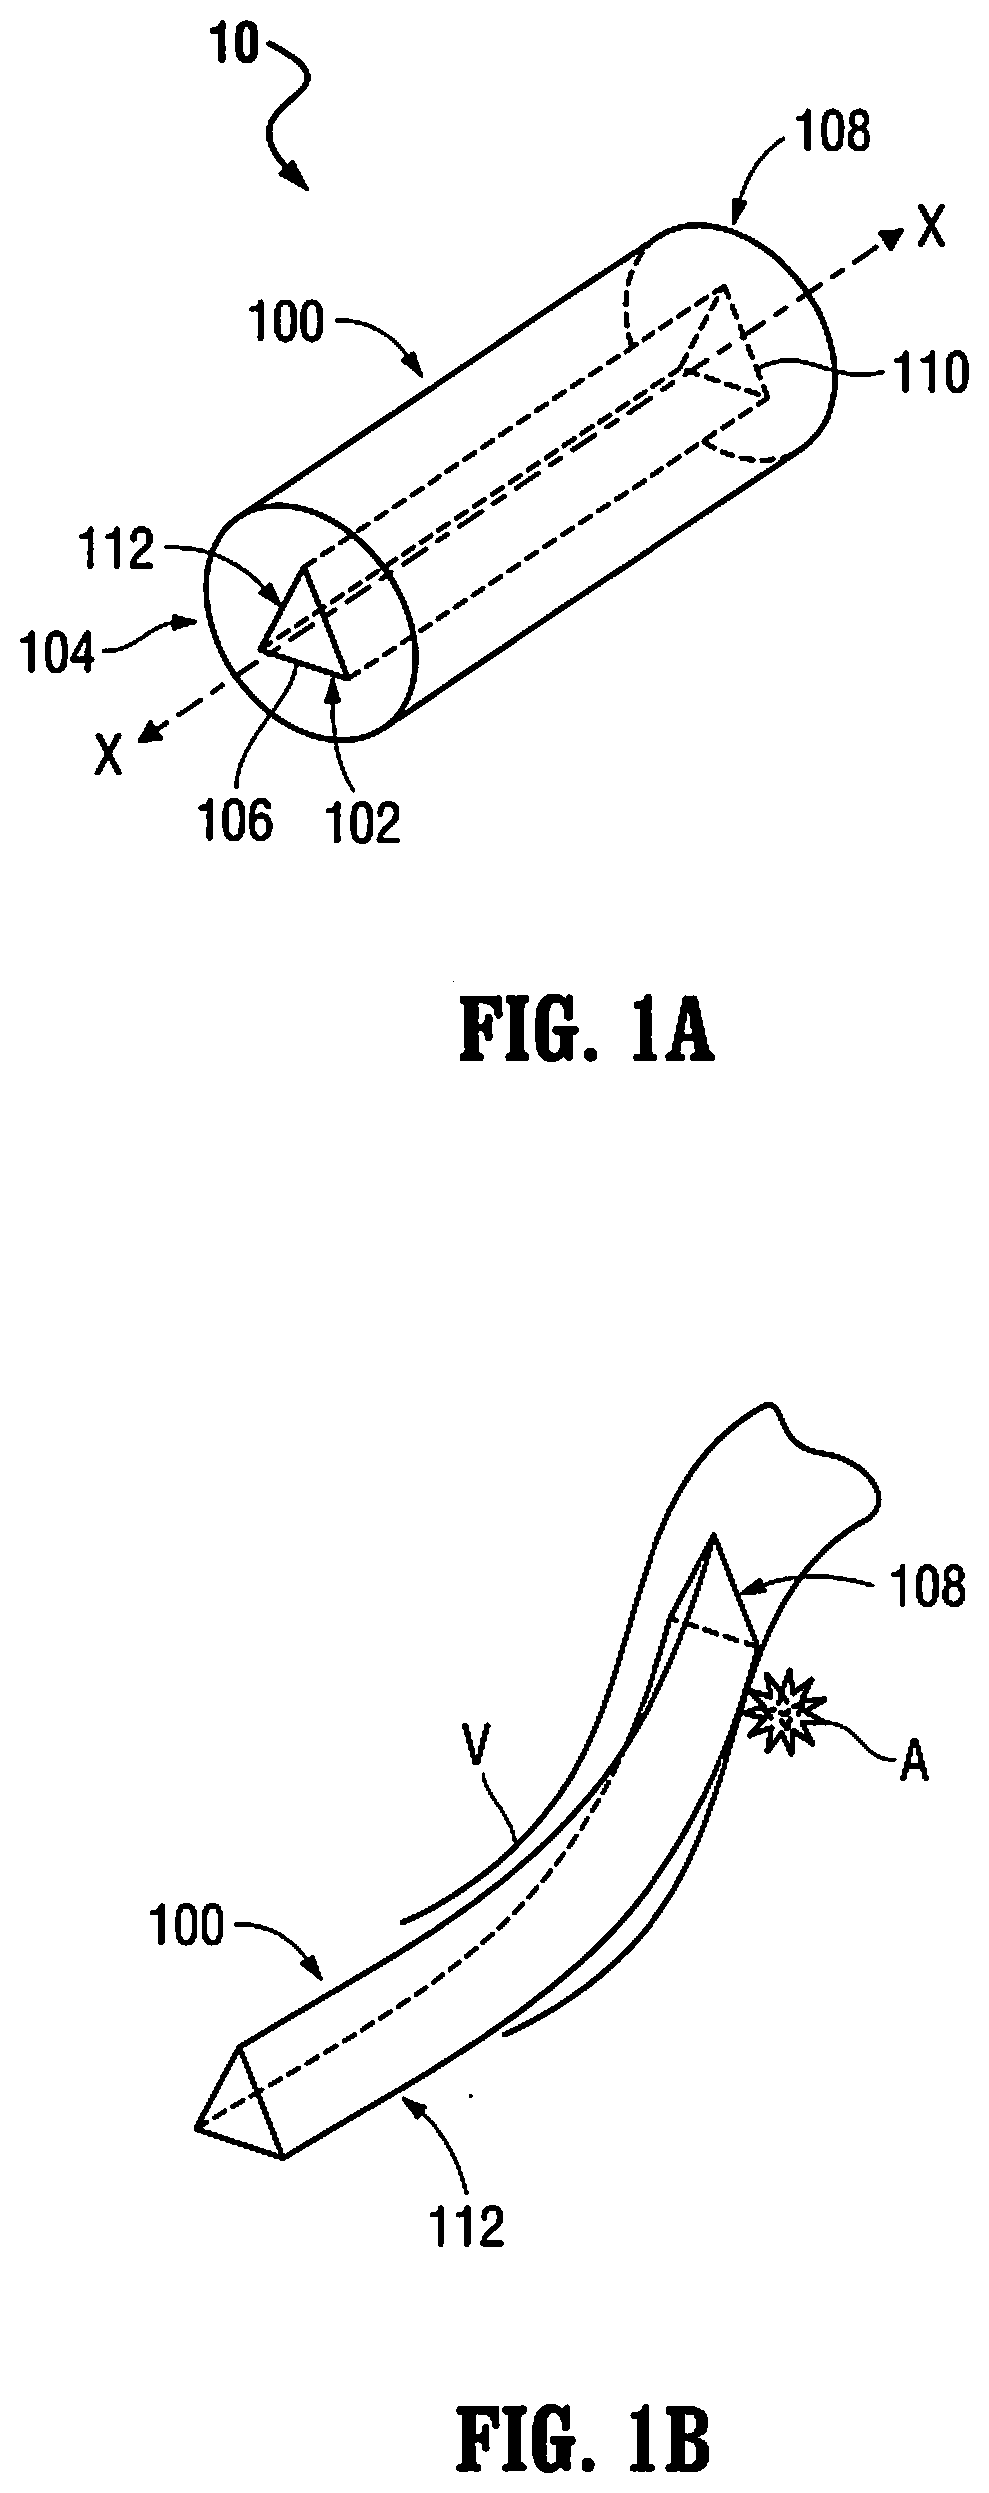 Orientable intravascular devices and methods